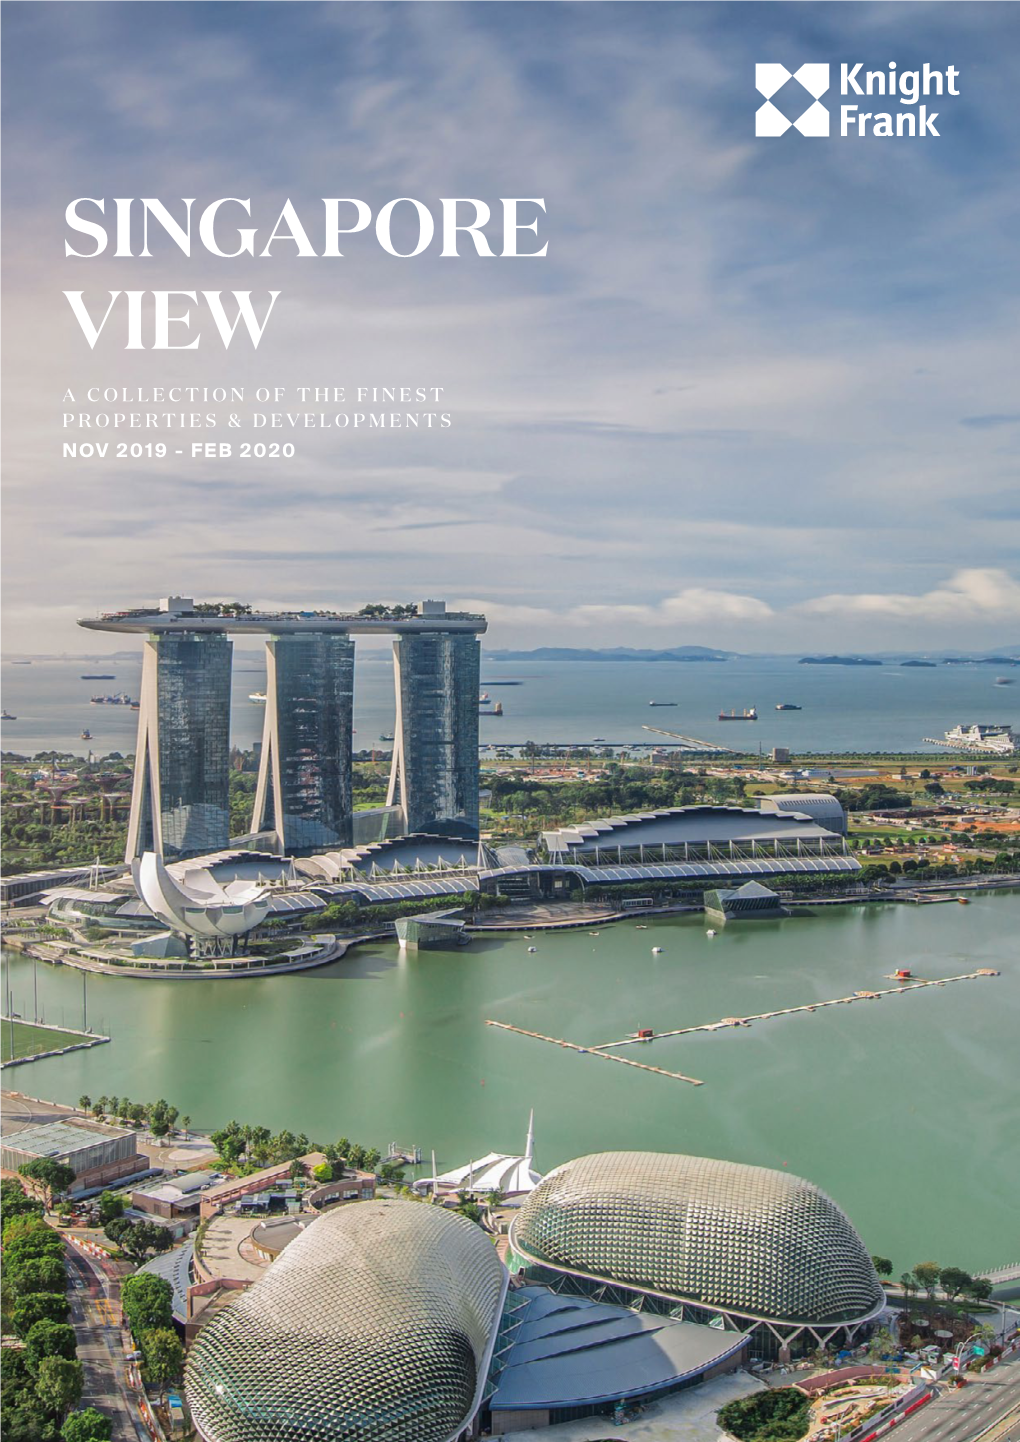 Singapore View a Collection of the Finest Properties & Developments